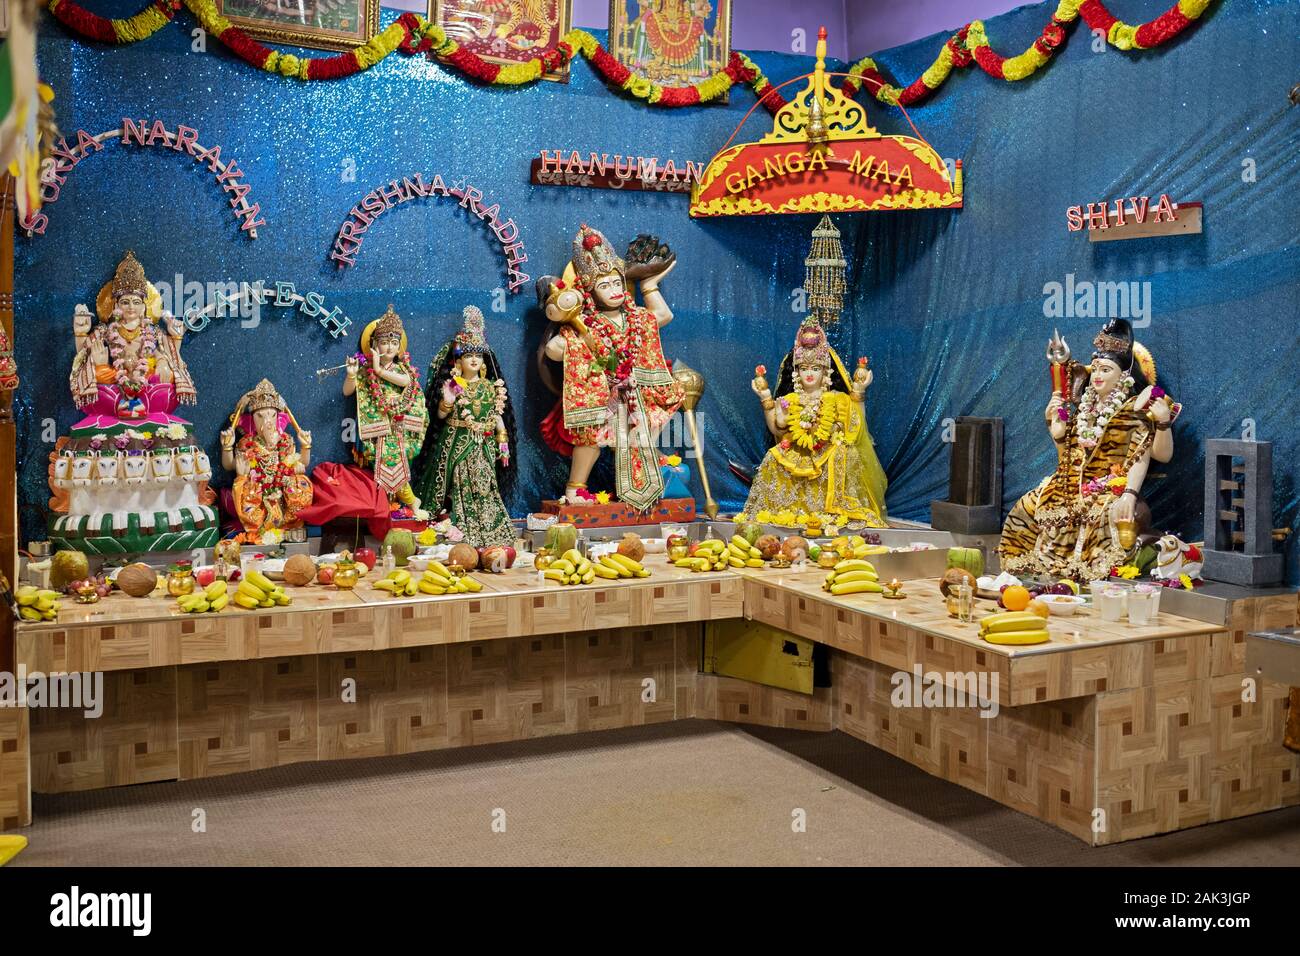 Statues of several Hidu deities at the Jamaica Maha Kali Temple in Queens, New York. Stock Photo